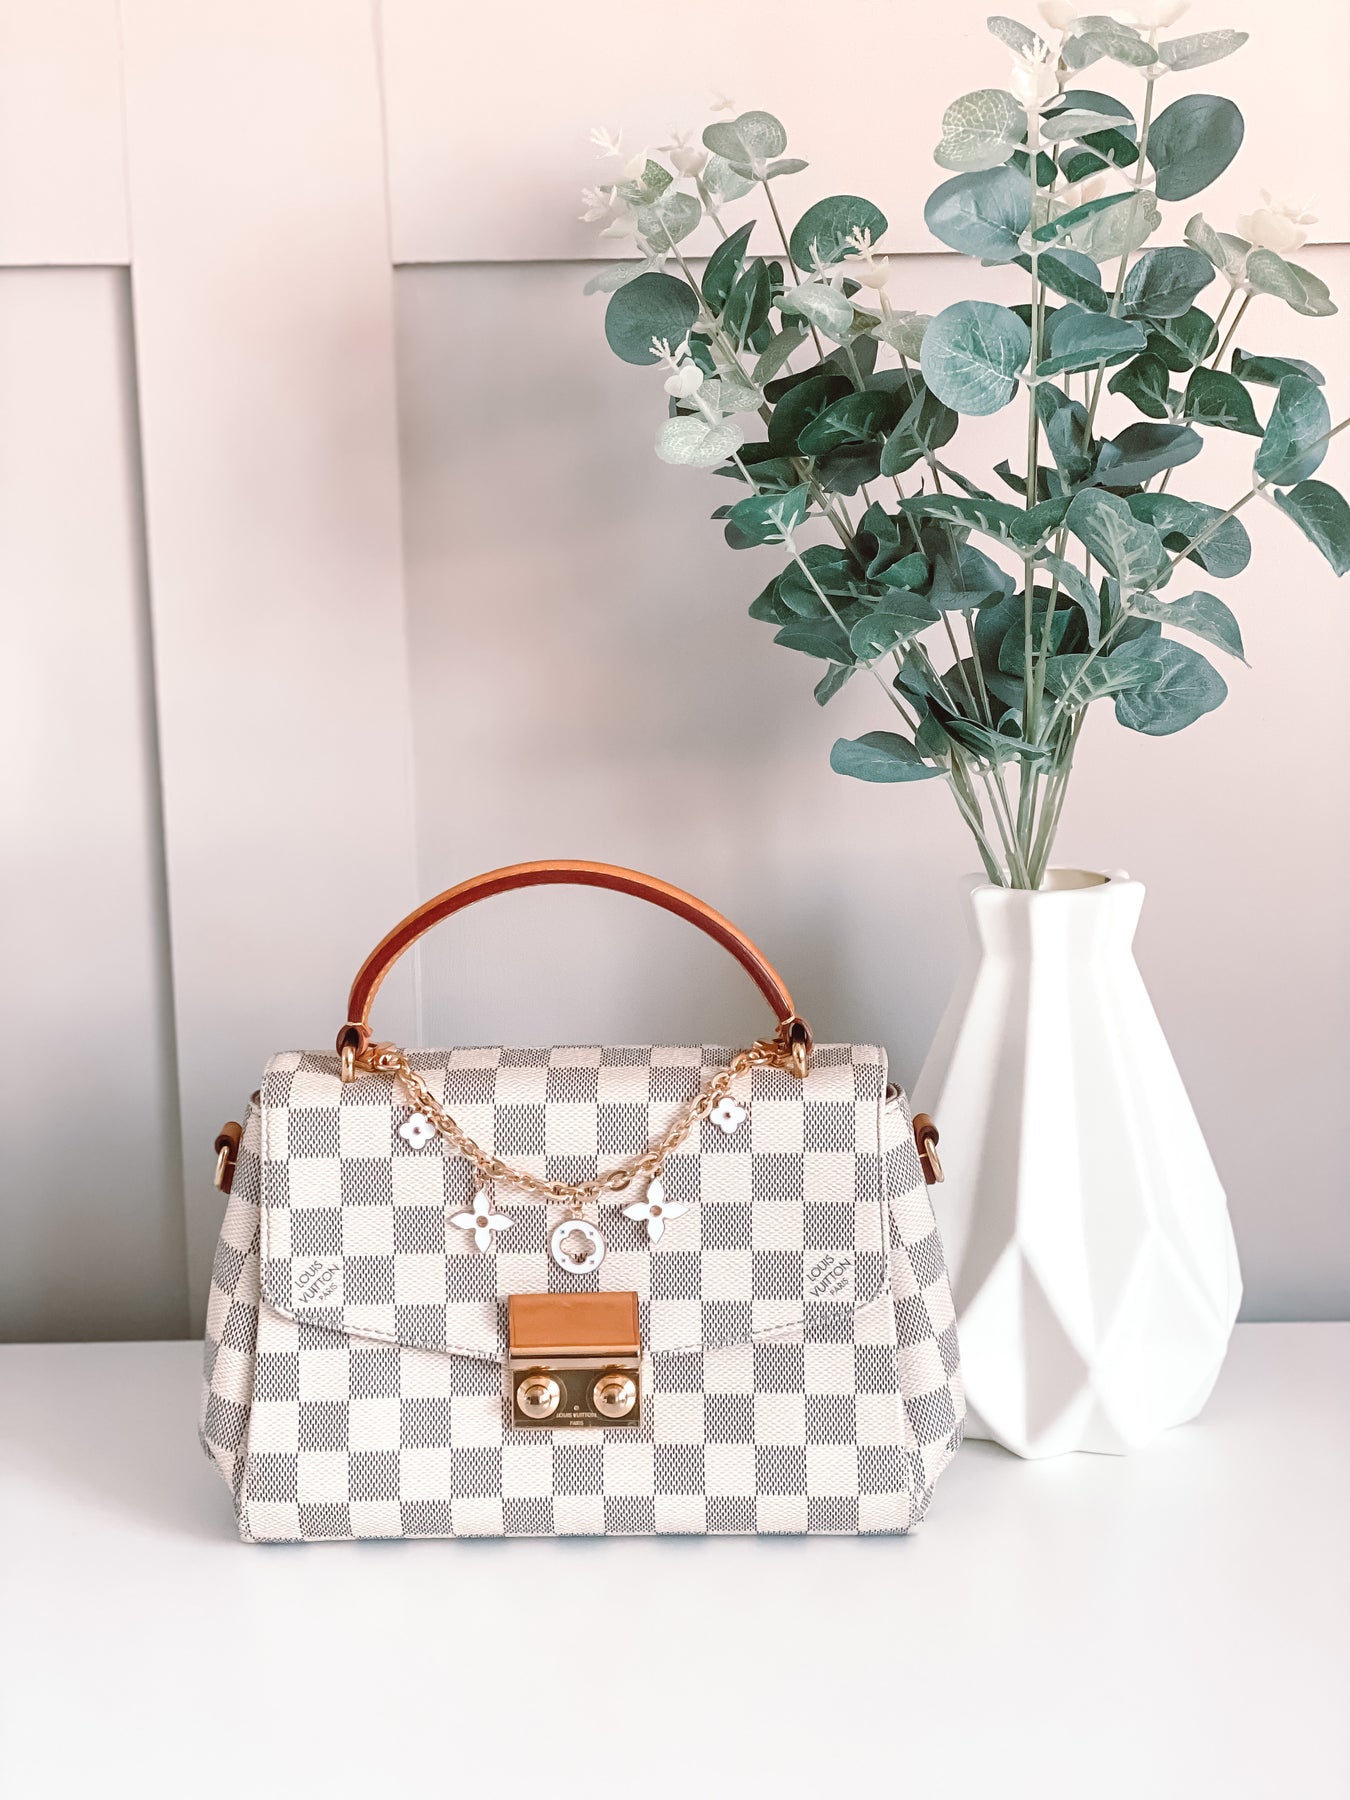 HOW TO CLEAN LOUIS VUITTON DAMIER AZUR CANVAS IN 3 EASY & FAST STEPS